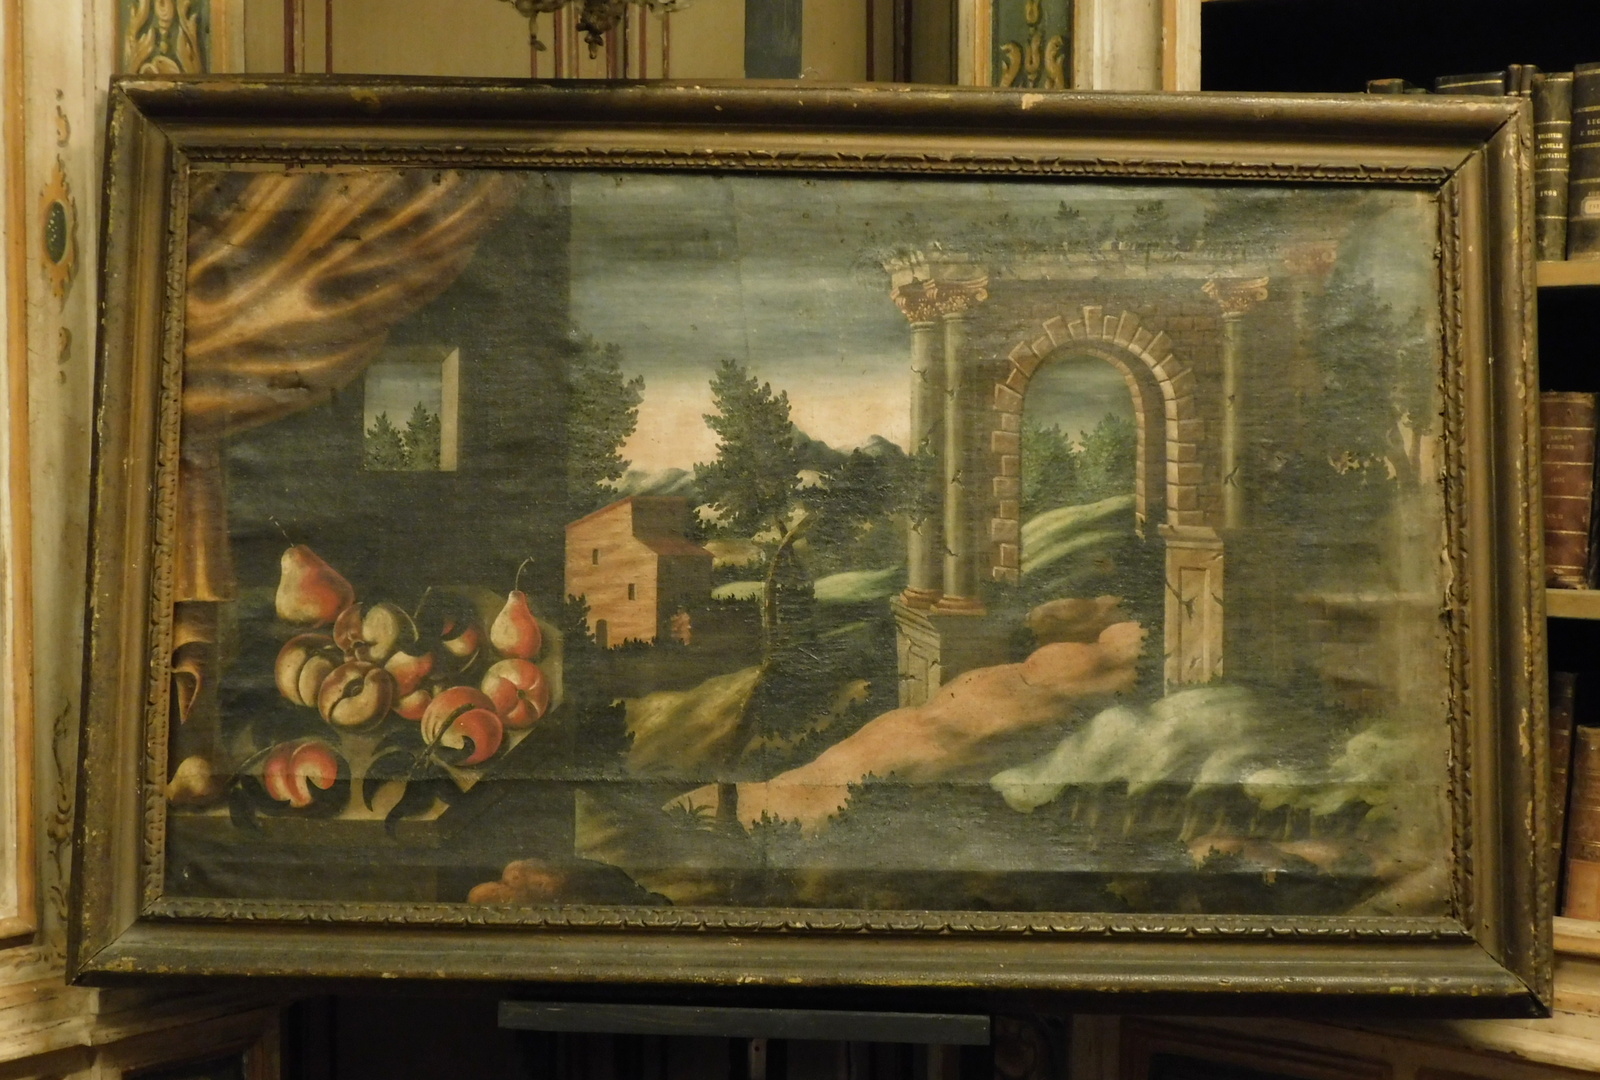 A pan289 - oil painting on canvas with frame, 17th century, cm l 150 x h 95